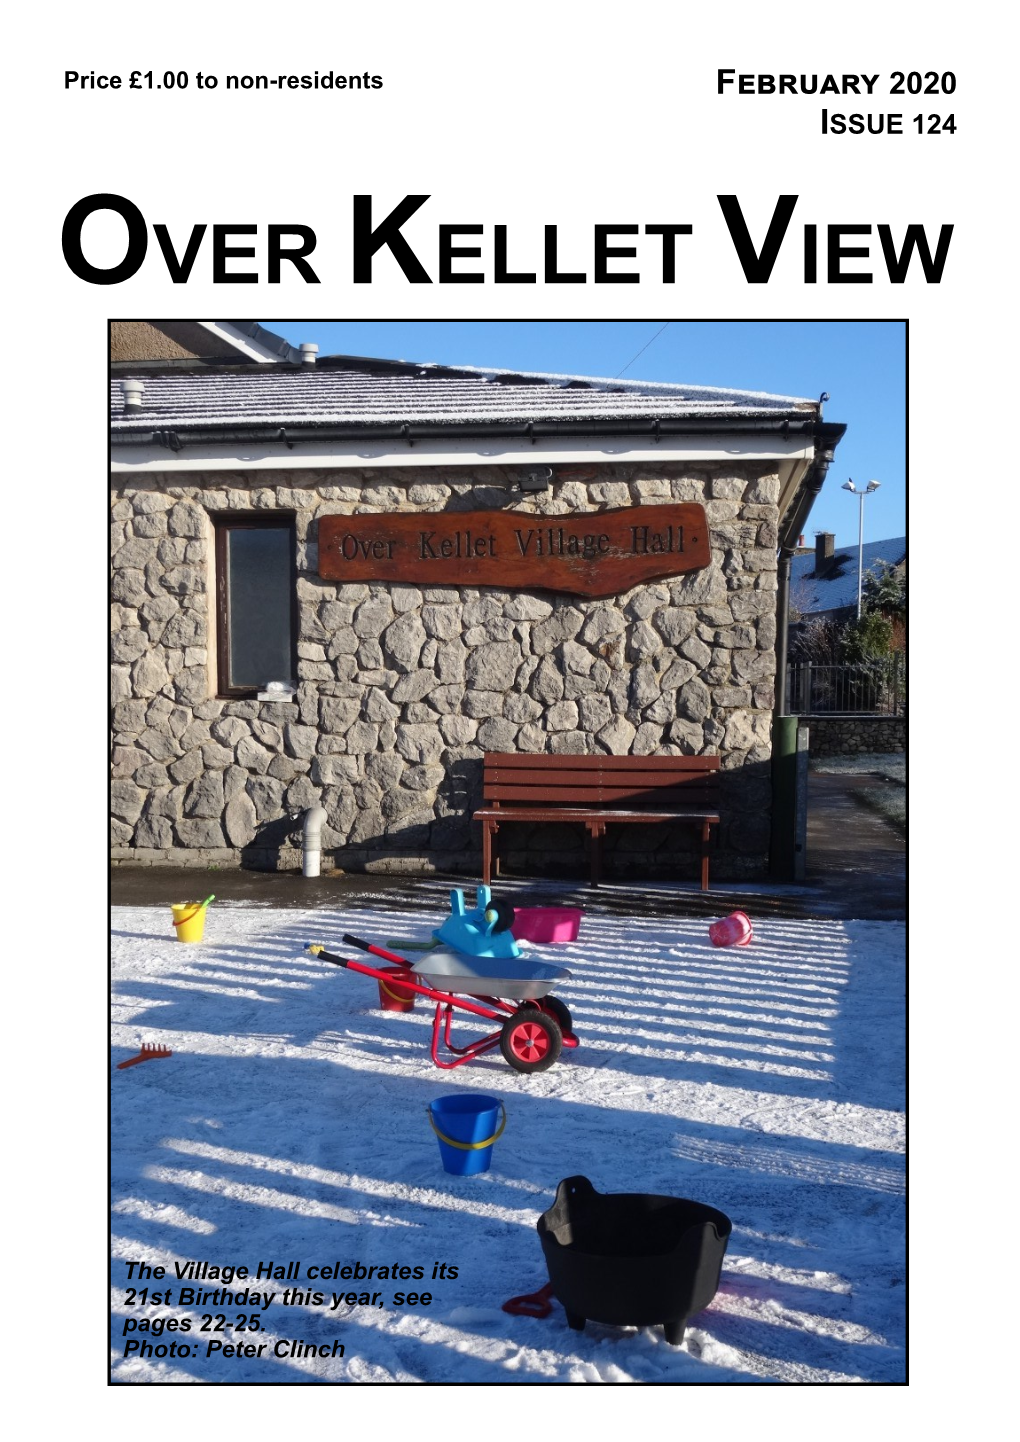 Download the Over Kellet View